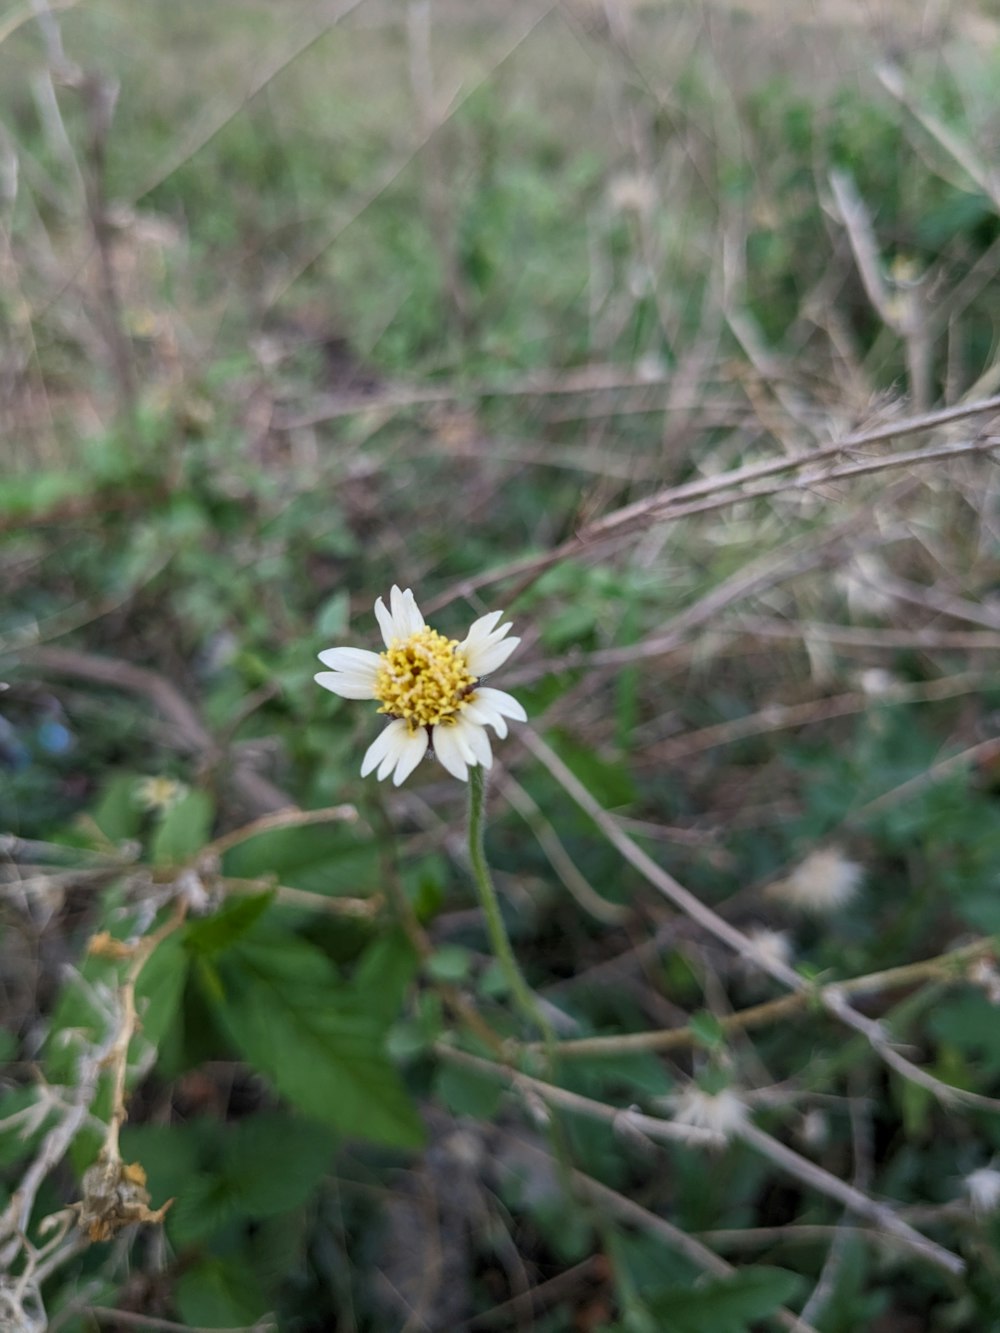 a white flower with a yellow center in a field